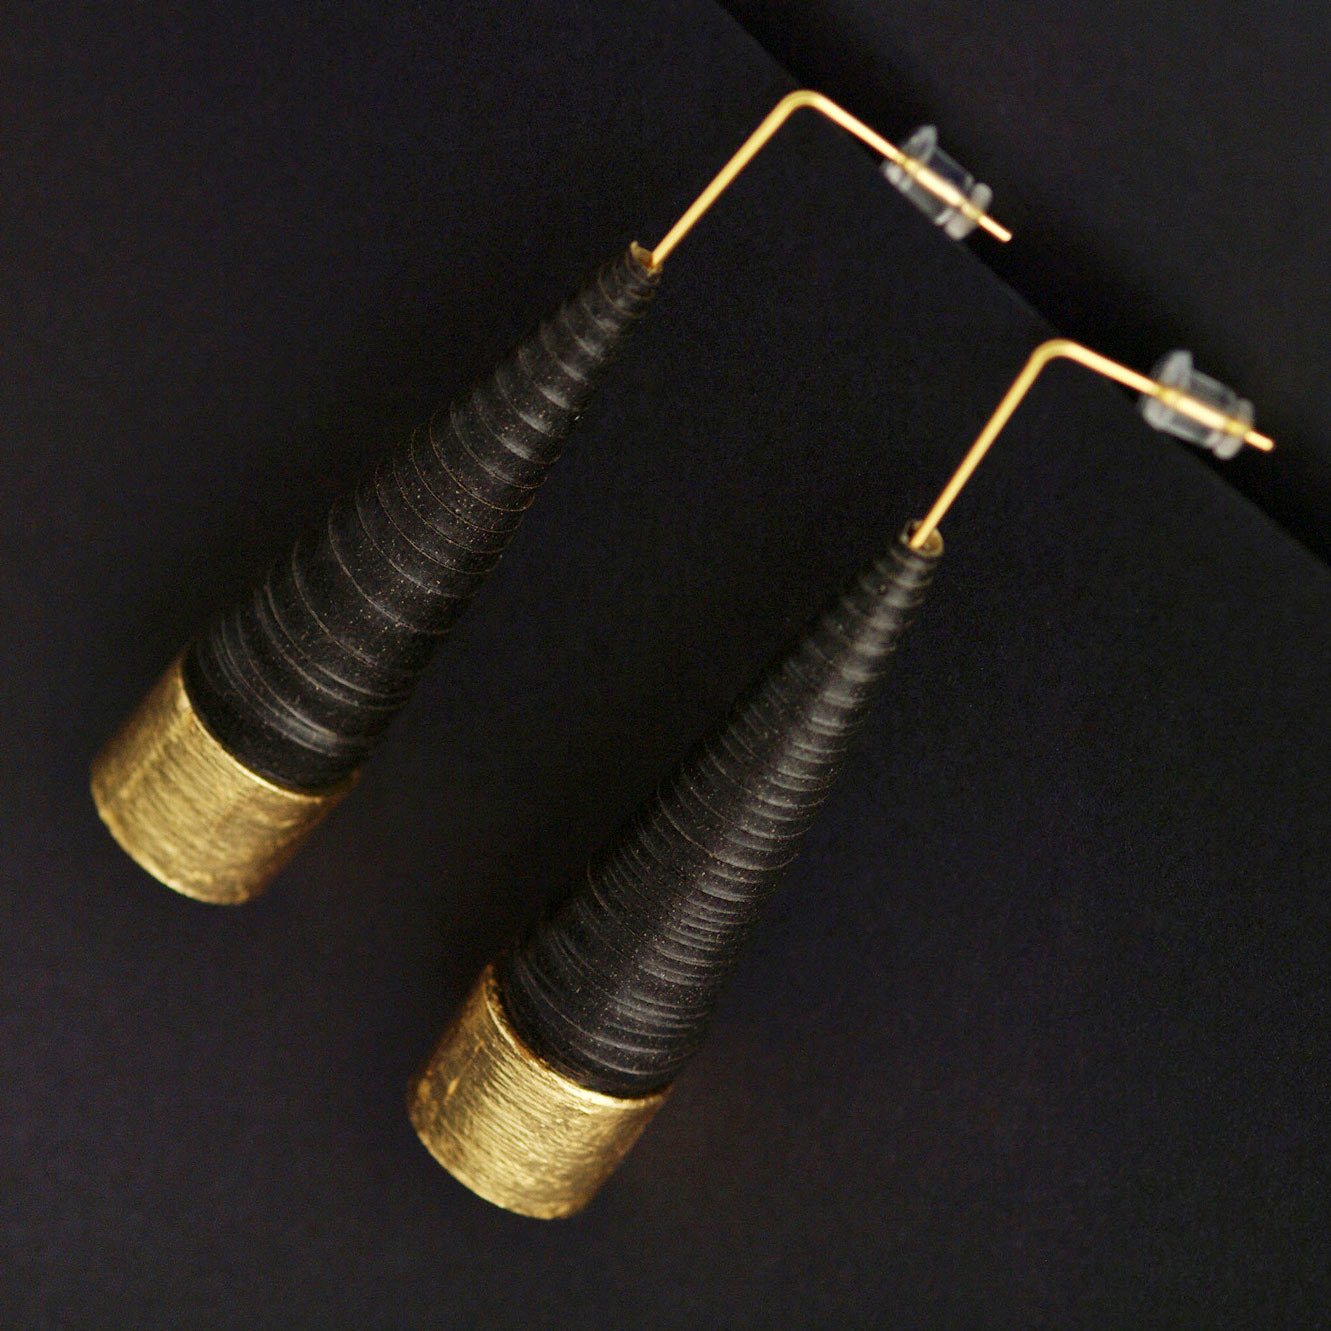 Black and Golden Conical Paper Earrings by Chiramo Paper Jewelry Back to Black Collection